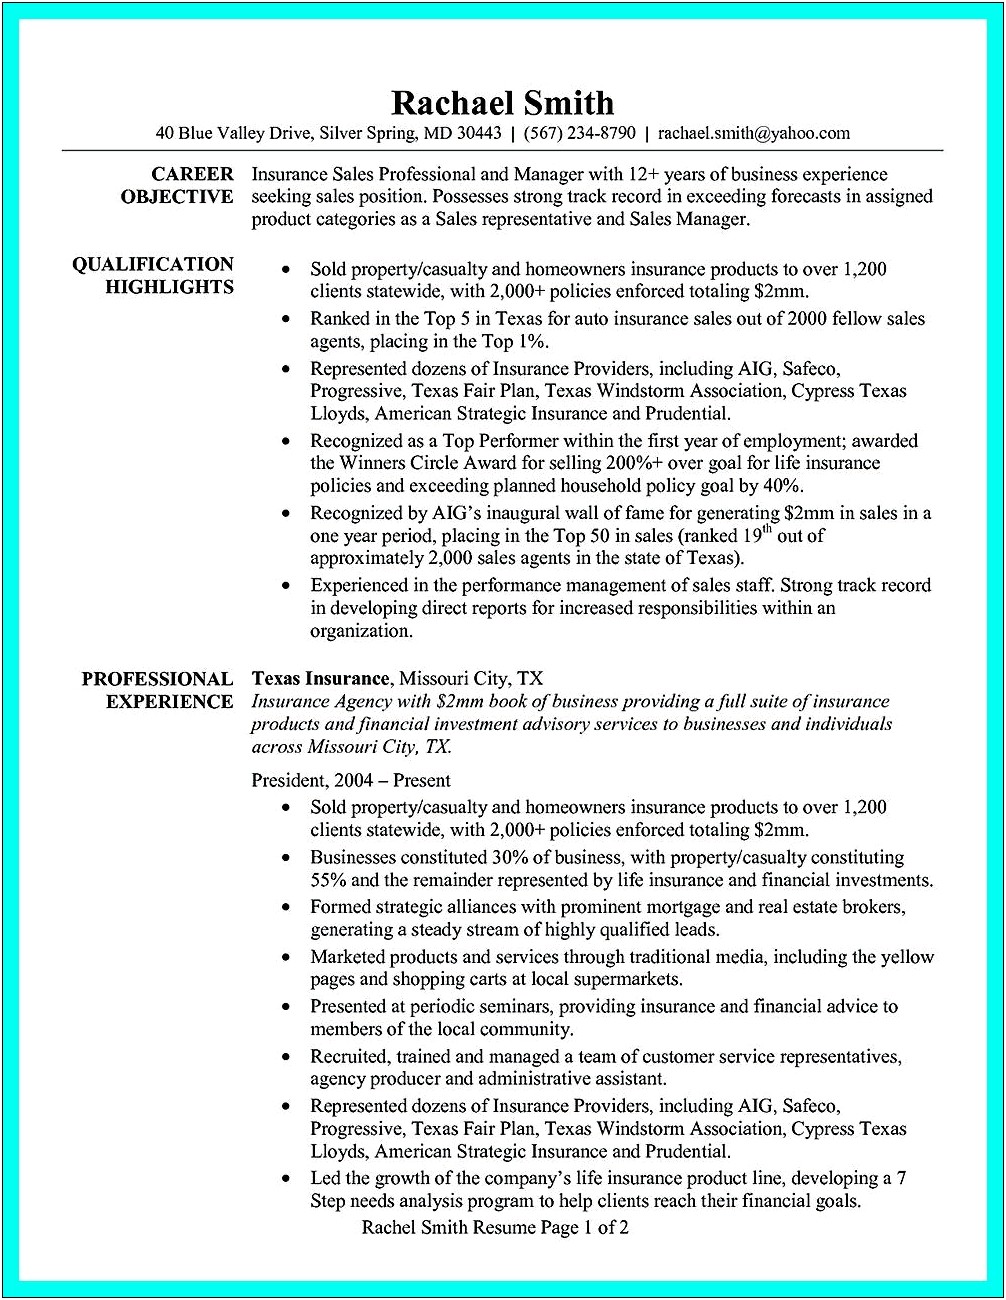 Resume Objective For Claims Adjuster